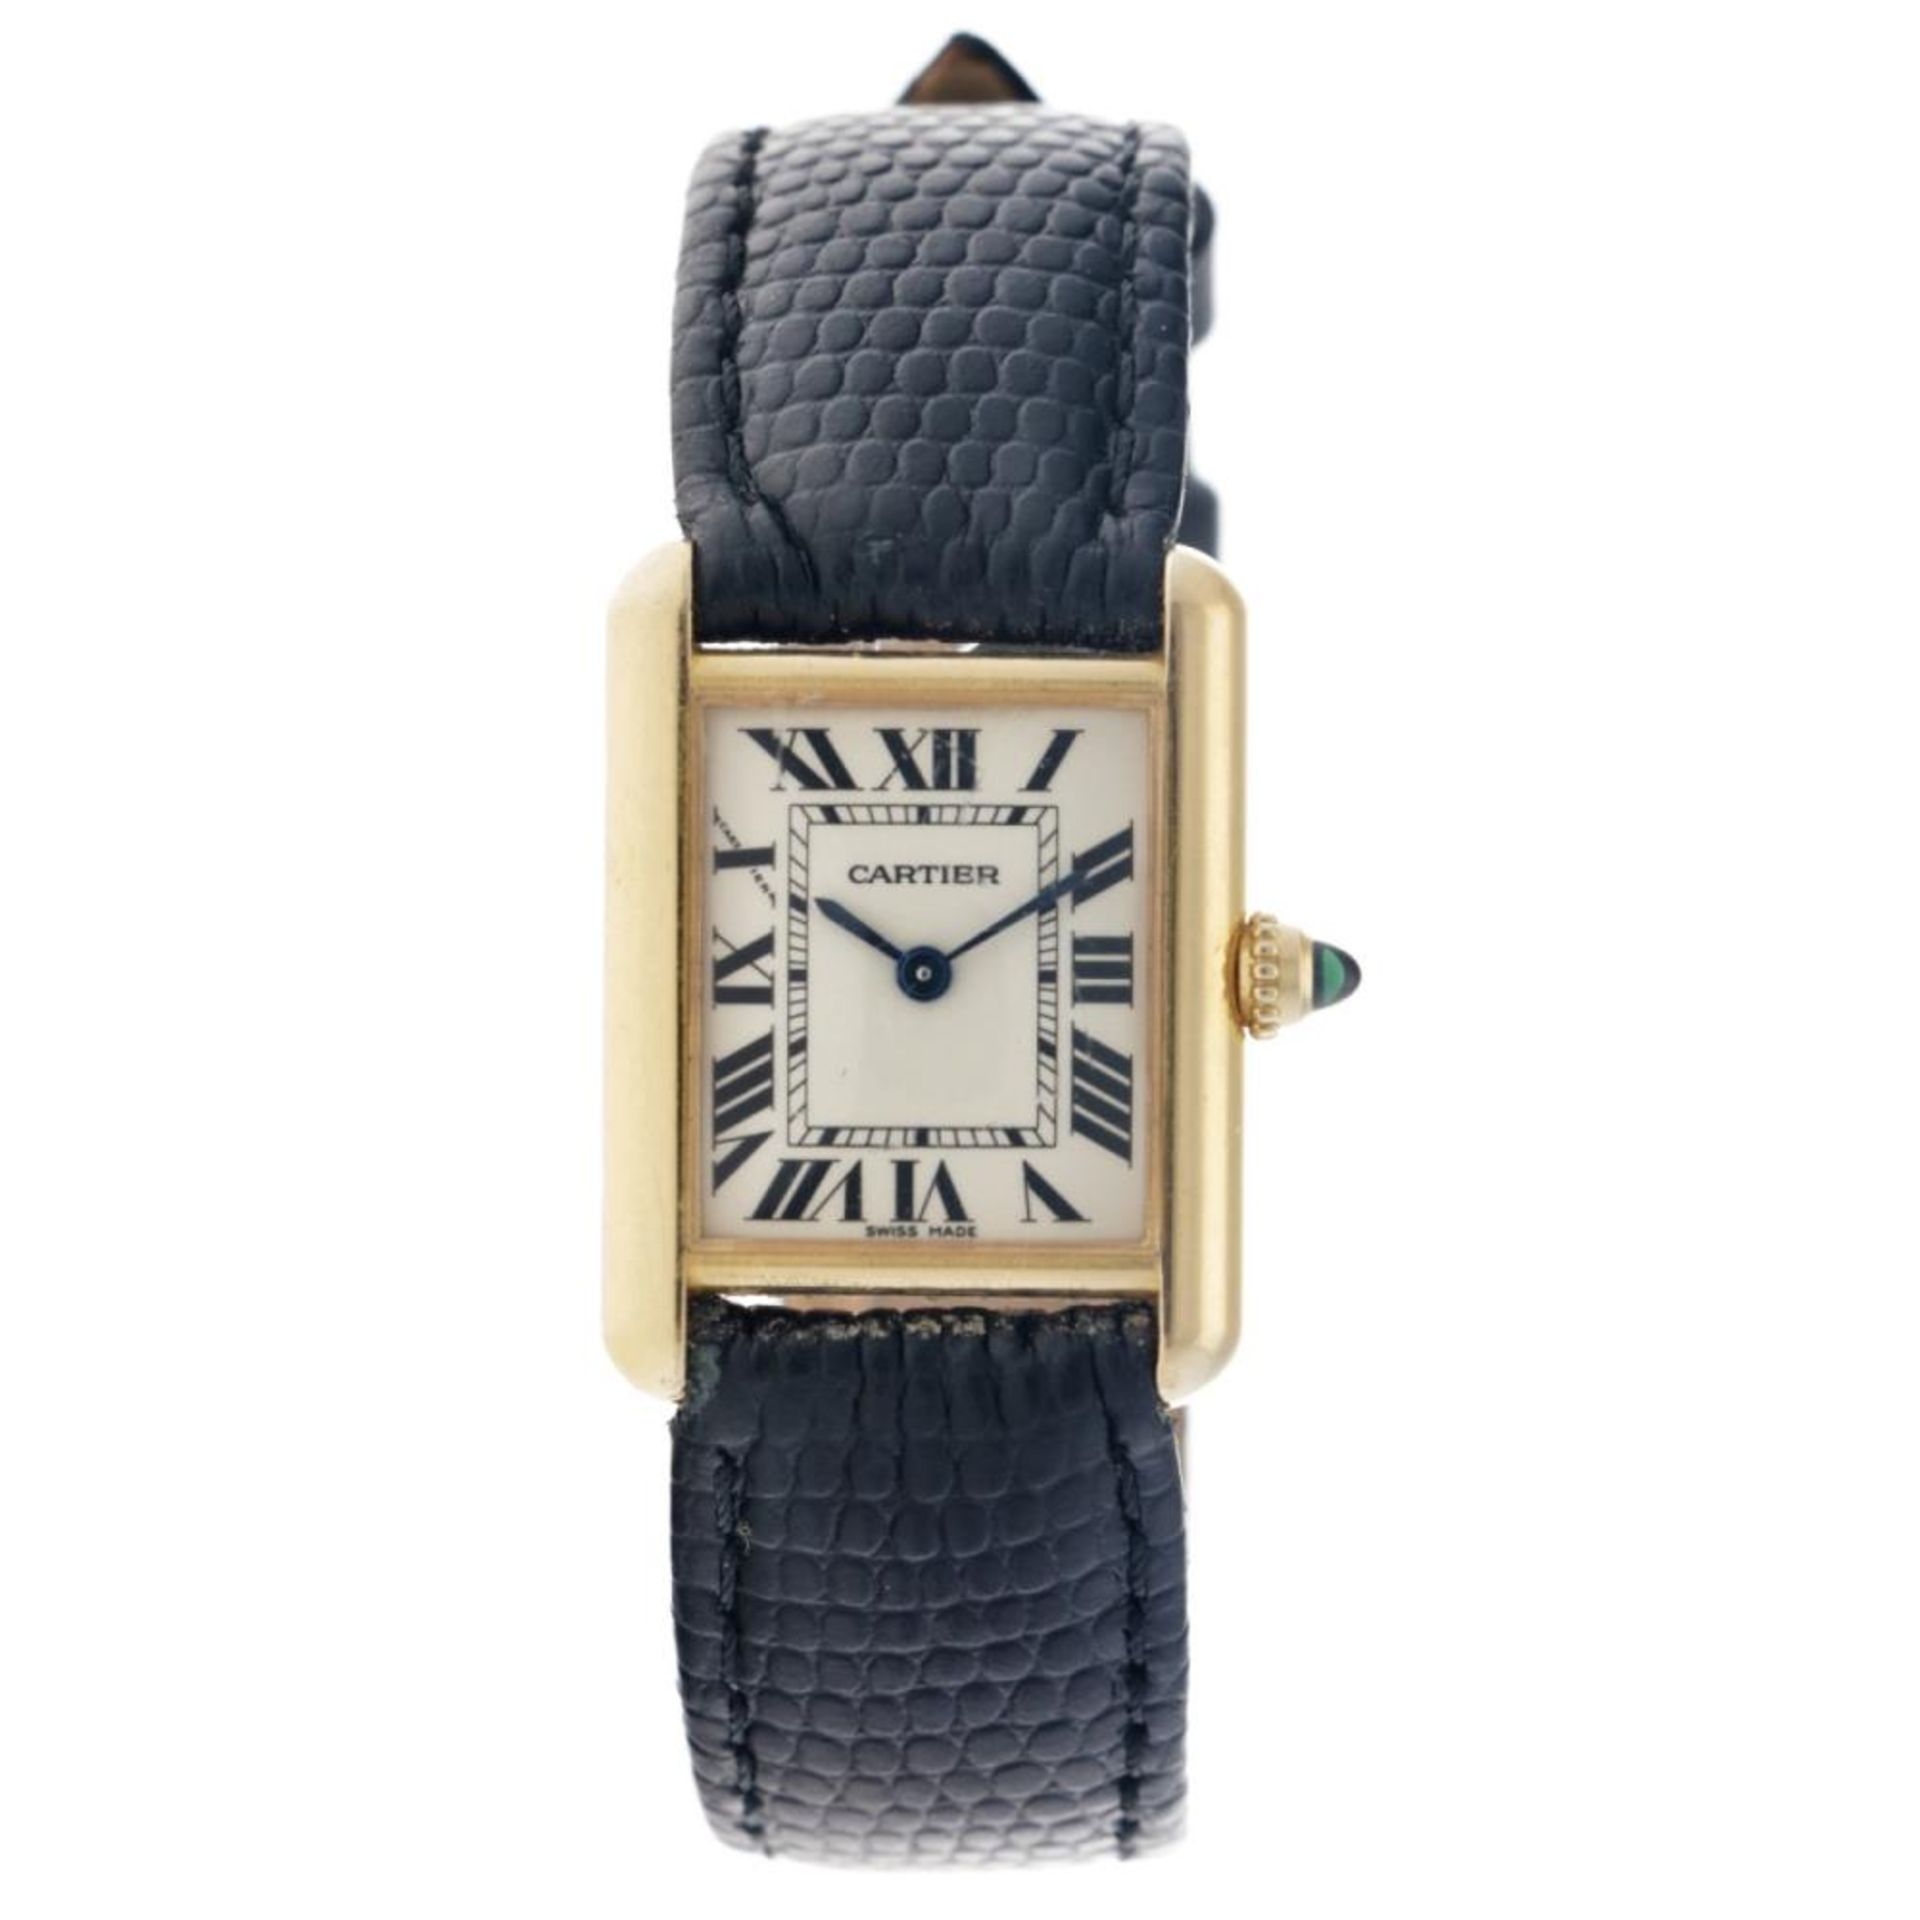 Cartier Tank Louis 2442 - 18 carat gold - Ladies watch - approx. 2010. - Image 2 of 10